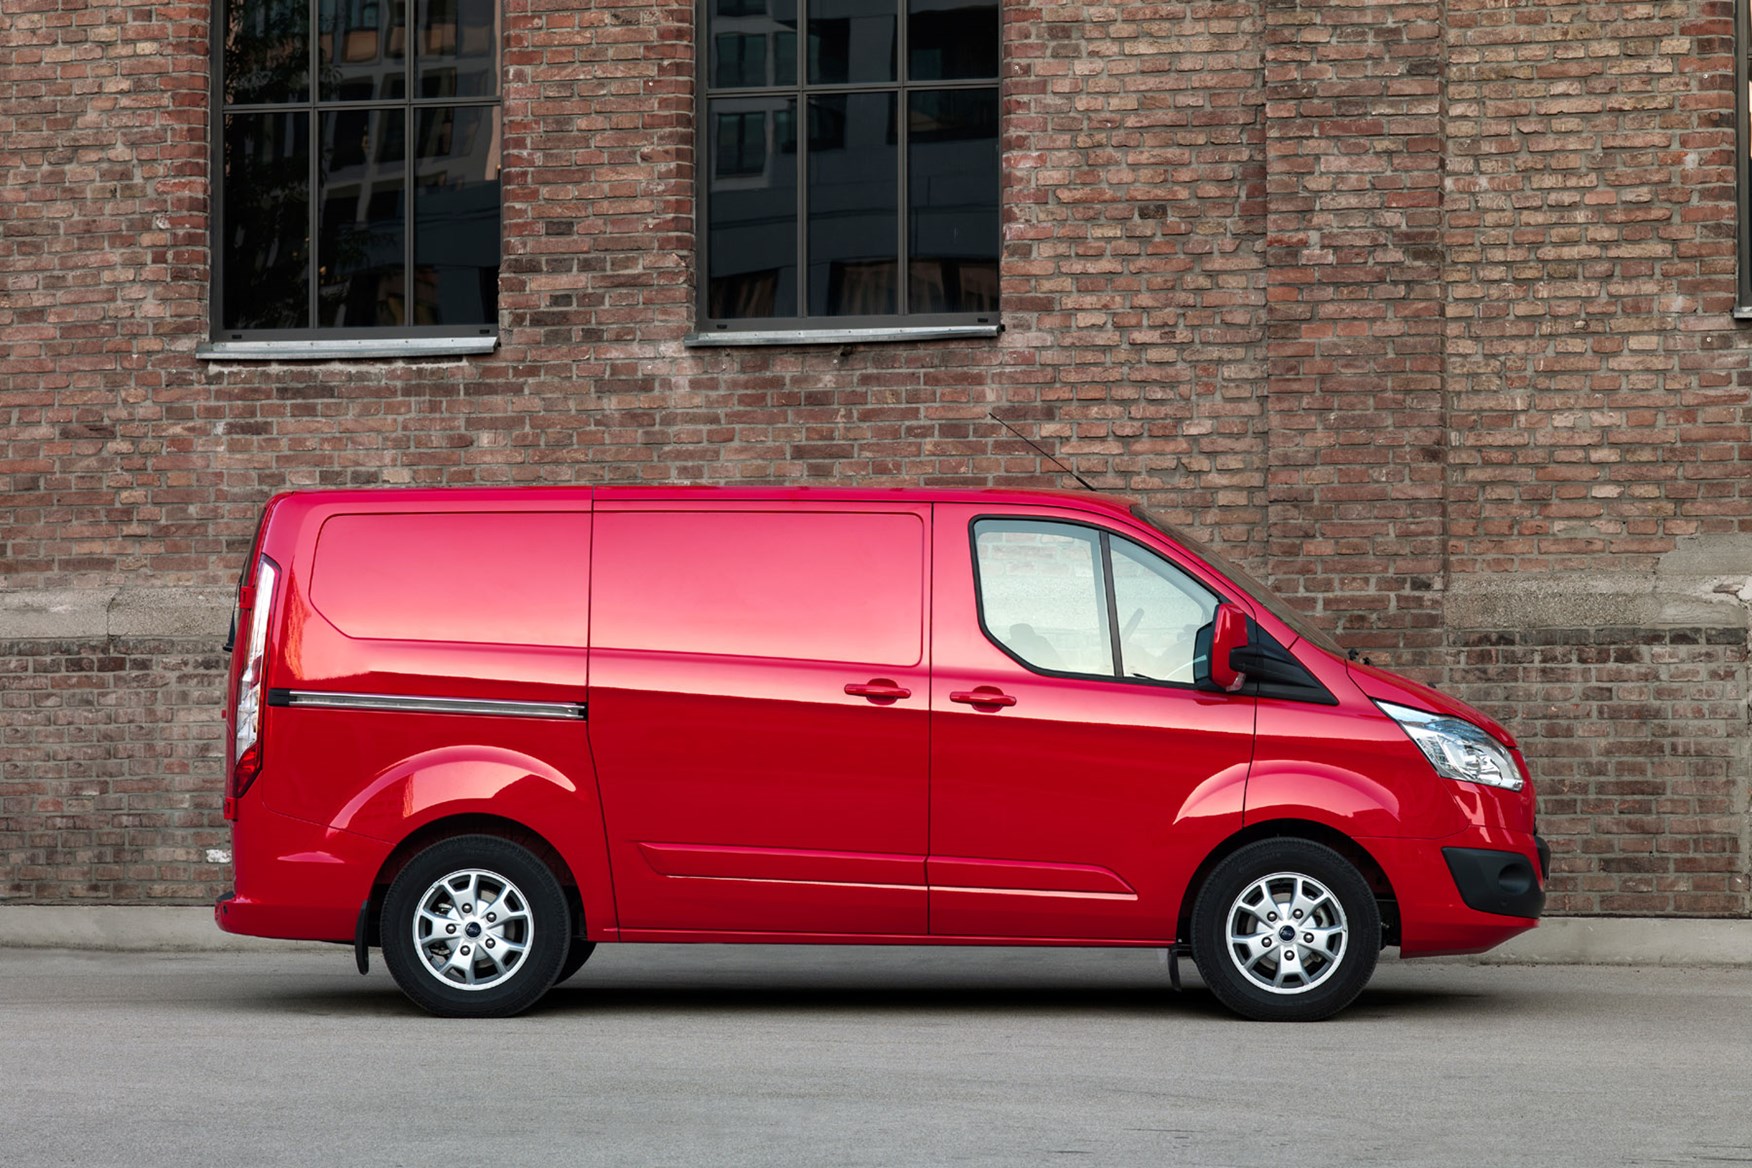 Ford Transit Custom dimensions - 2012 pre-facelift L1 side view